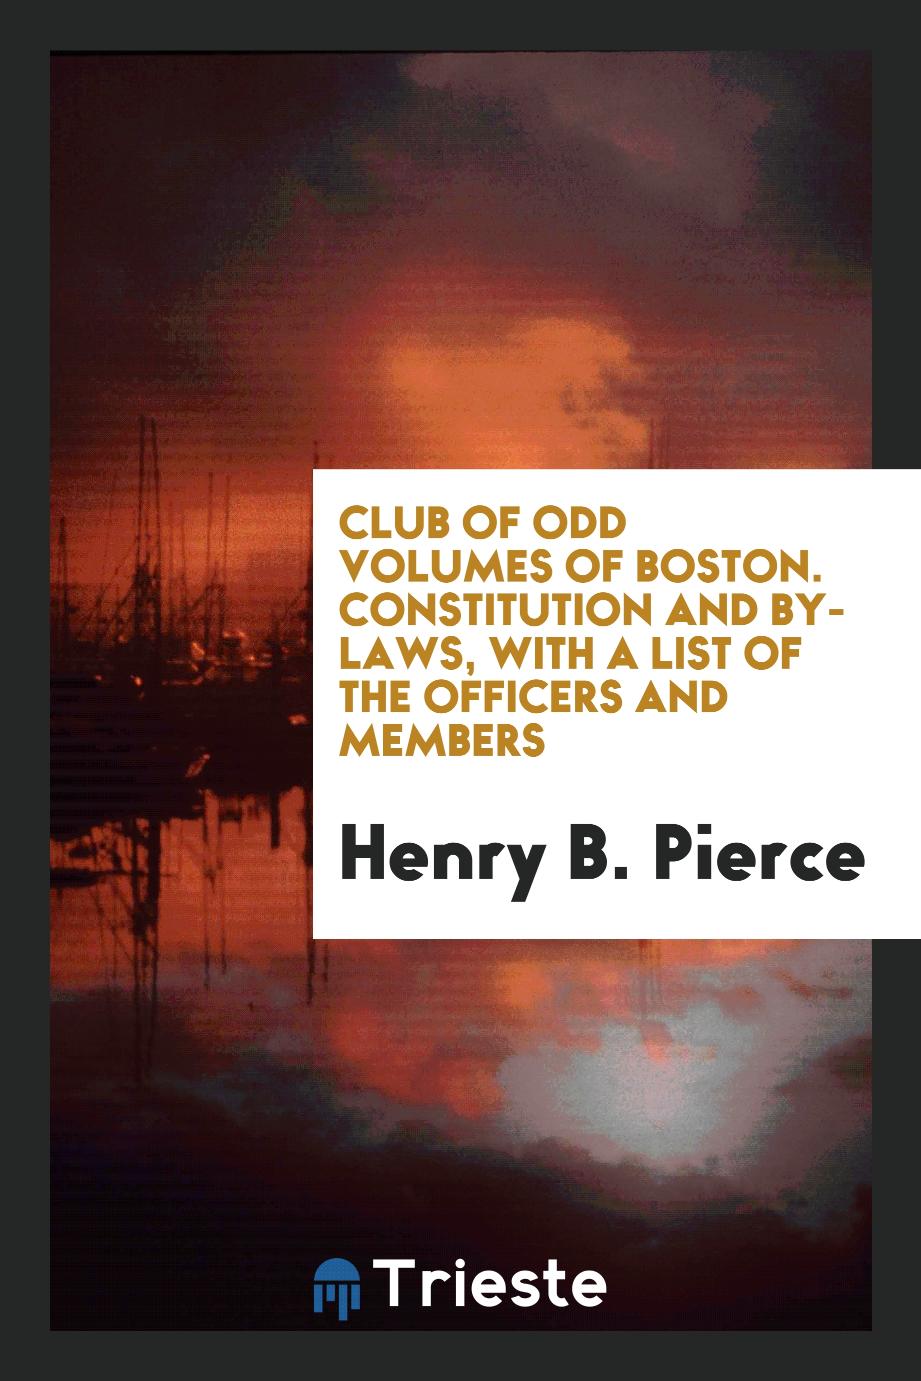 Club of Odd Volumes of Boston. Constitution and by-laws, with a list of the officers and members